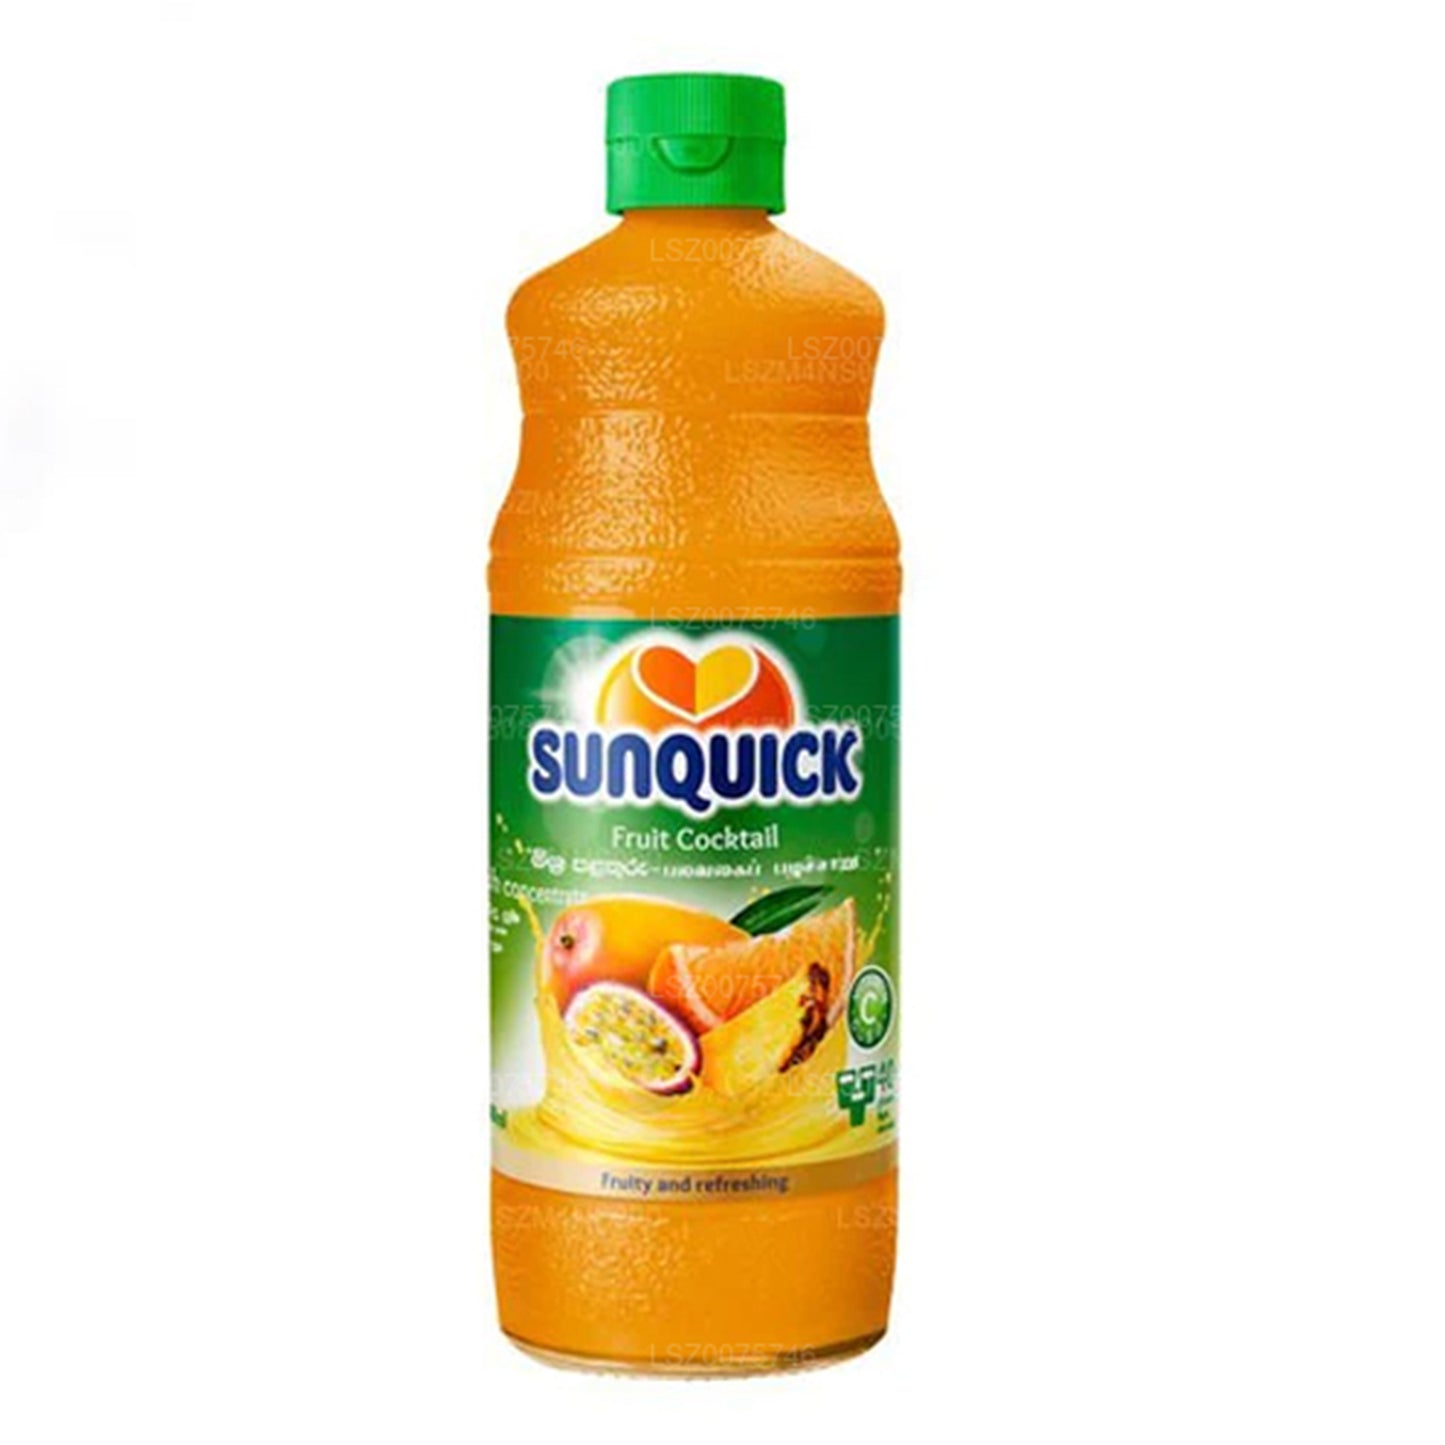 Sunquick Frugt Cocktail (840 ml)